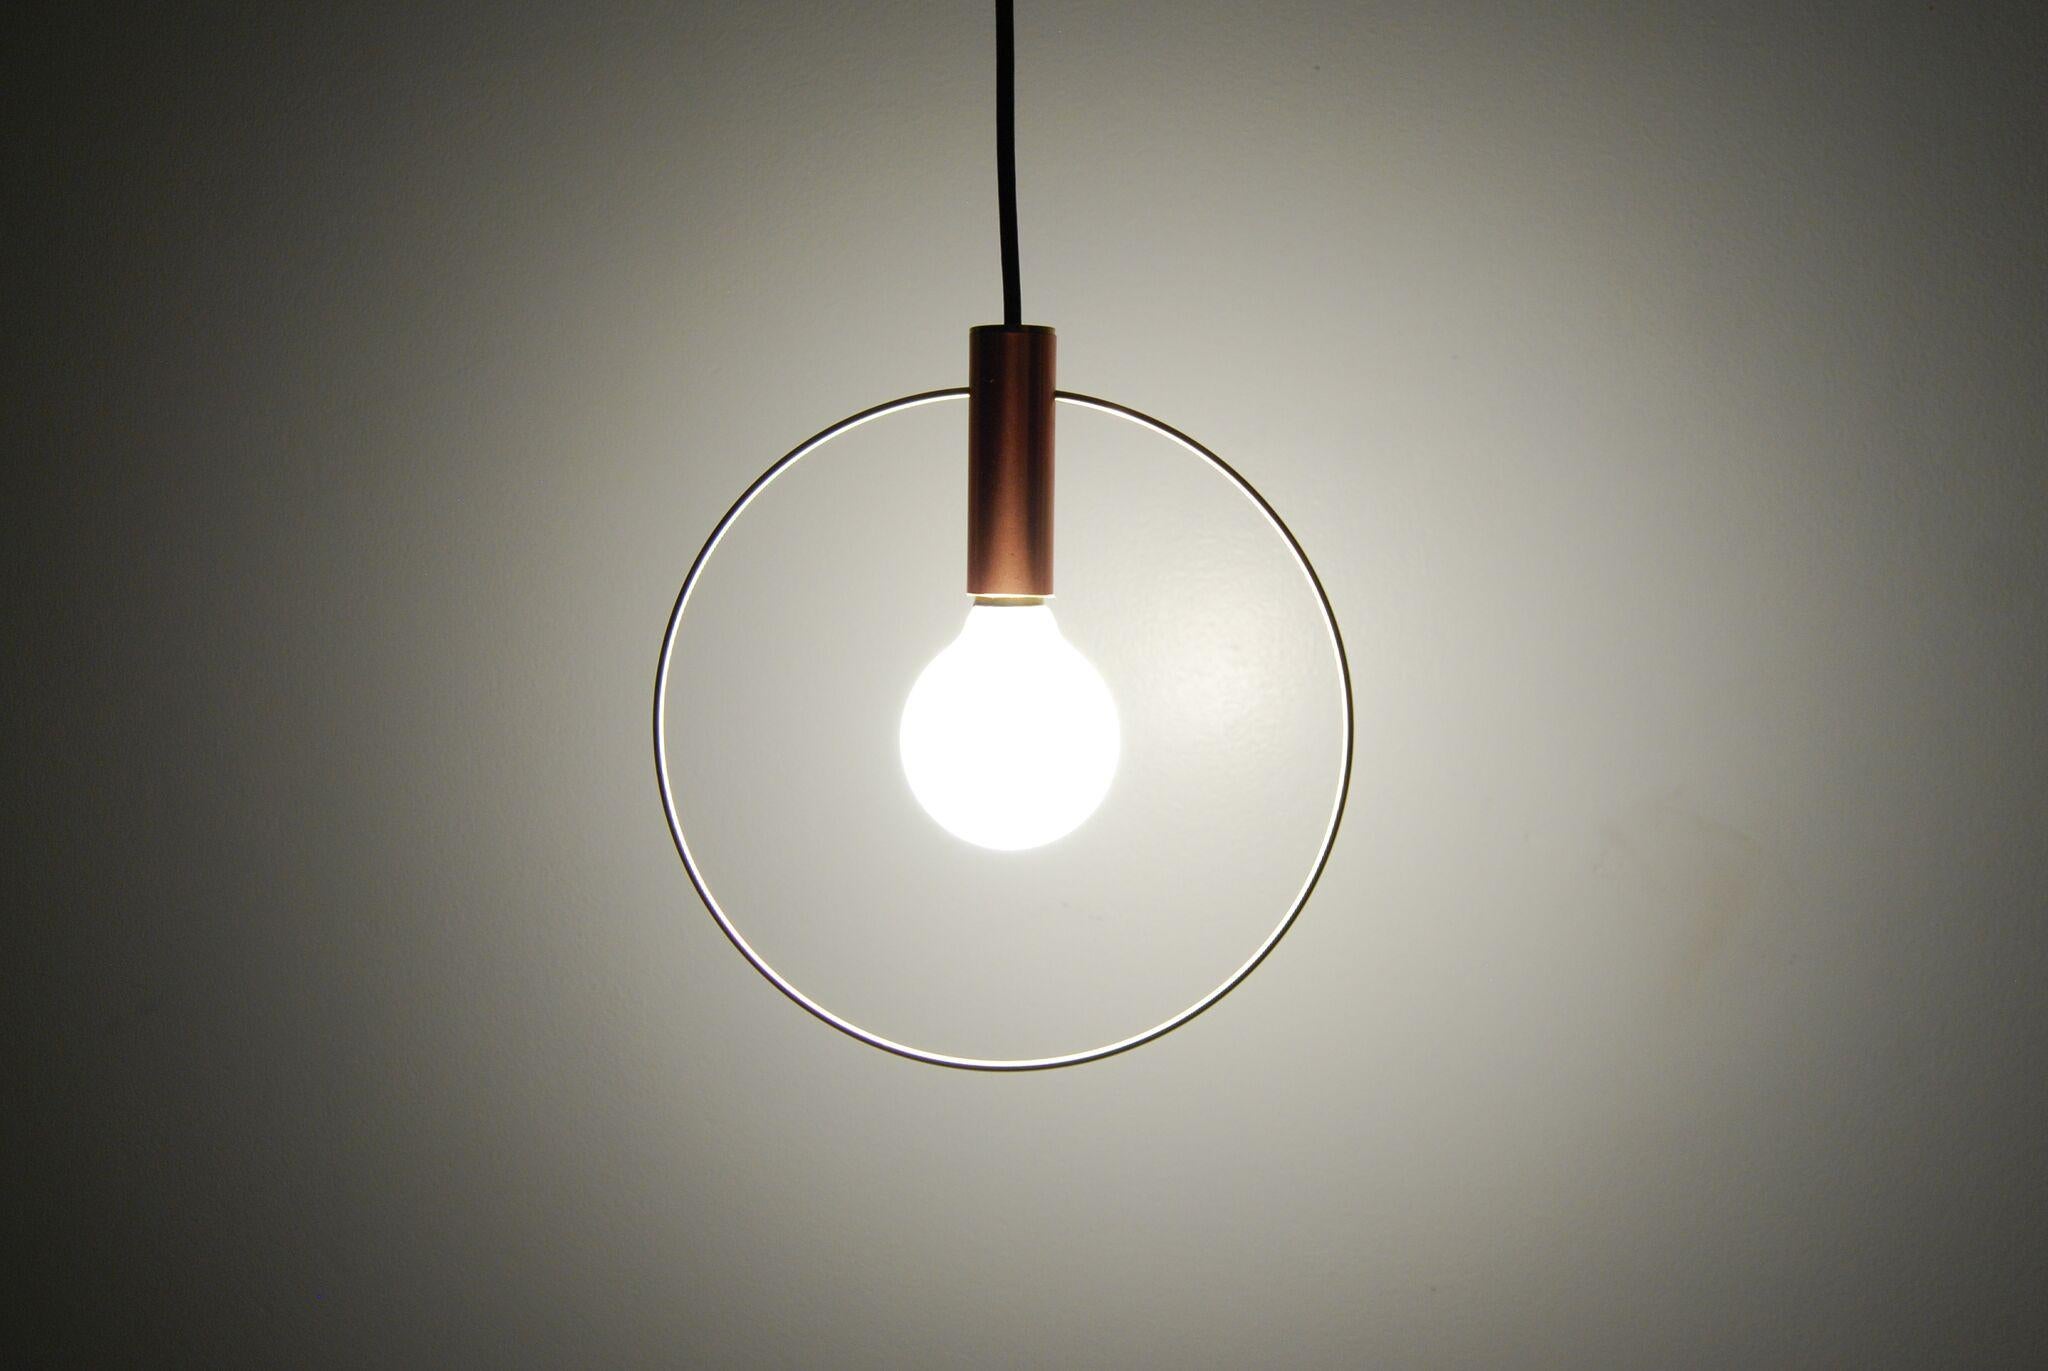 Light pared down into its two elemental ingredients: the source (the bulb) and its illumination (highlighted by a brass ring) The resulting Aura pendant lights are simple and versatile. Pendant can be hung individually at adjustable heights or in